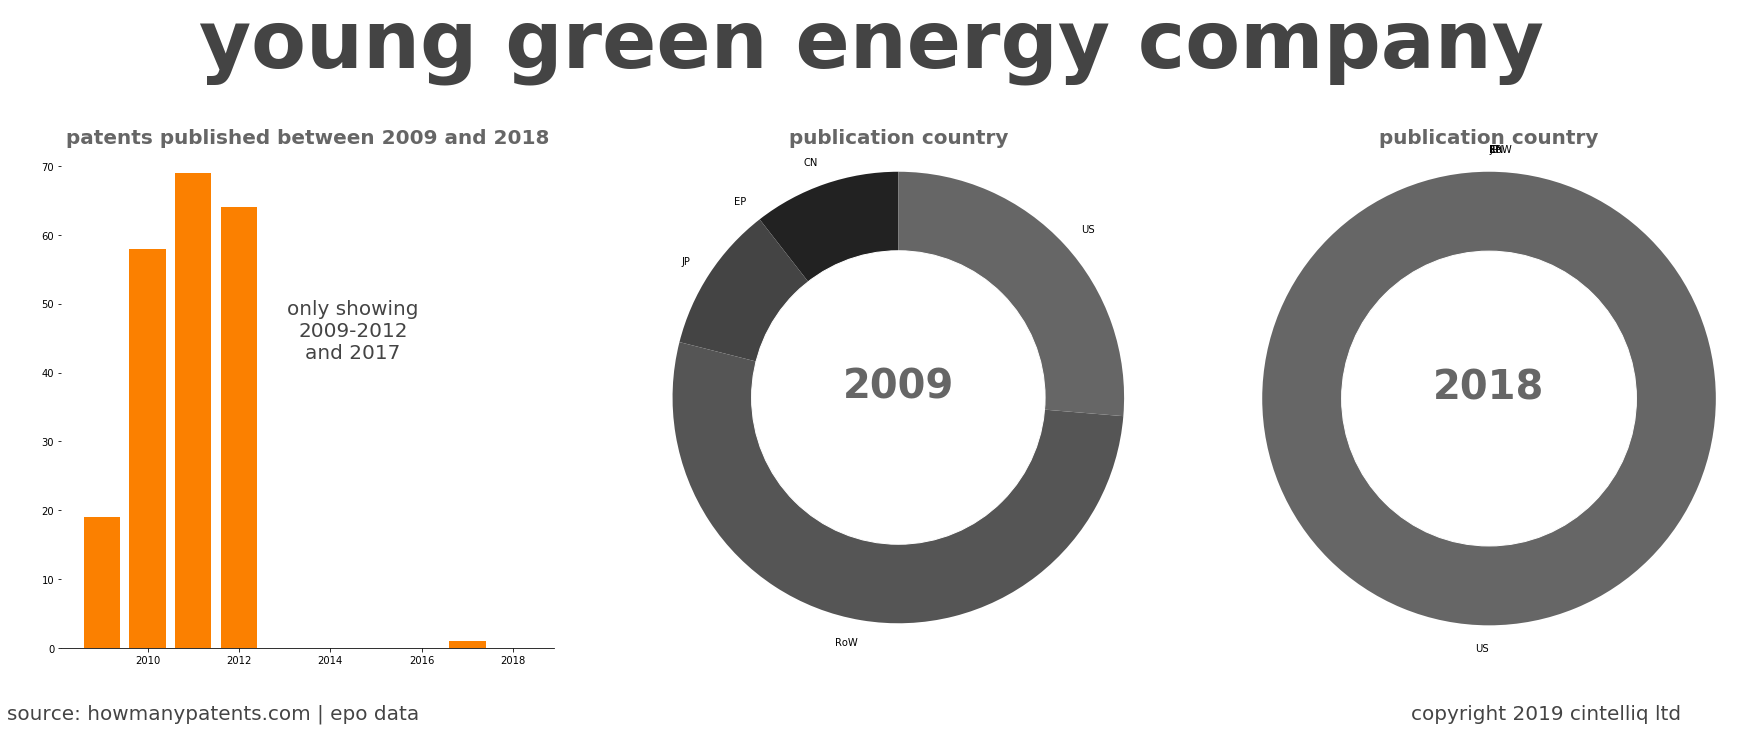 summary of patents for Young Green Energy Company